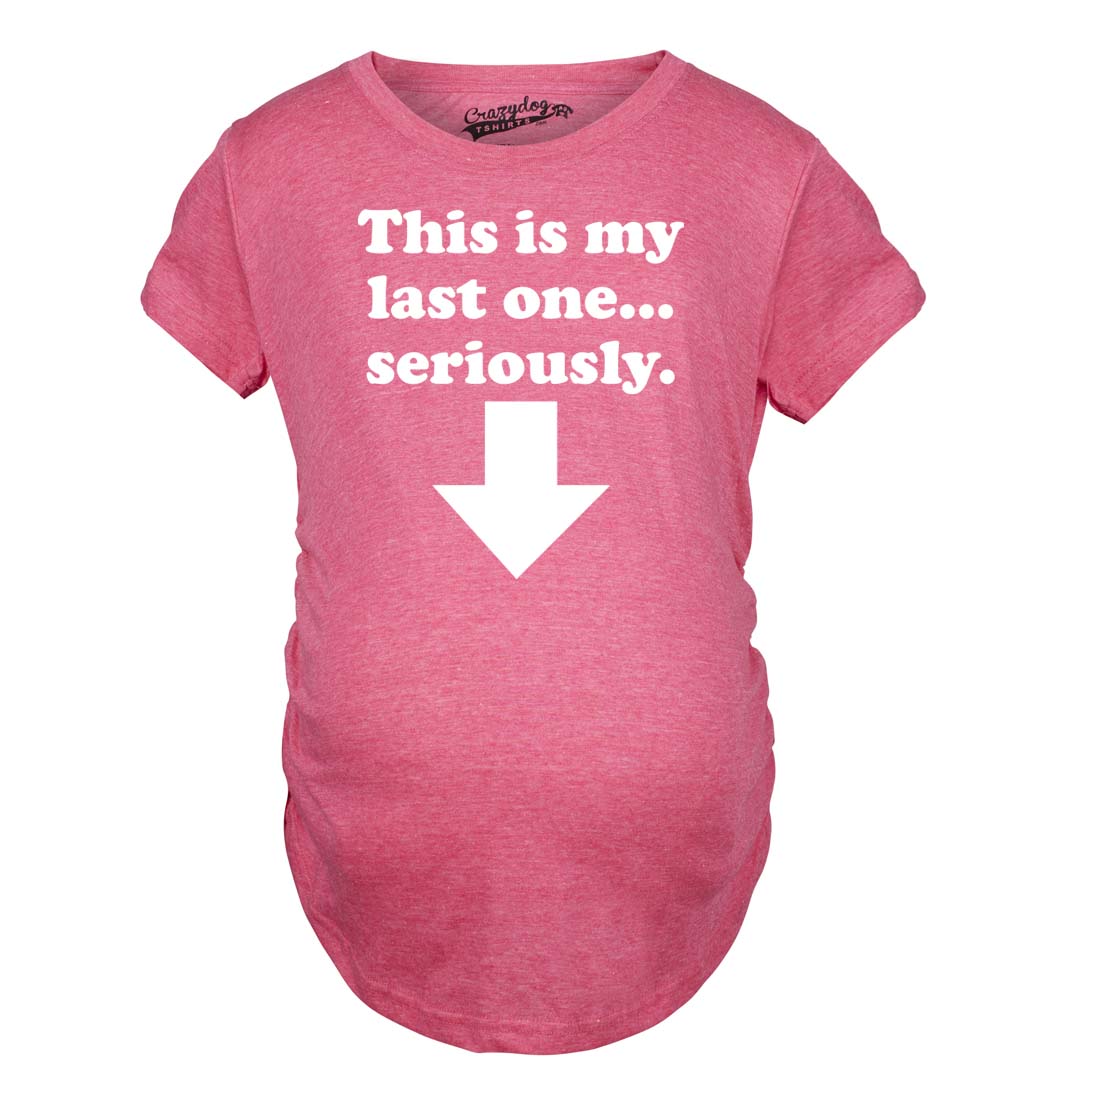 Funny Pink - Last One This Is My Last One Seriously Maternity T Shirt Nerdy Sarcastic Tee